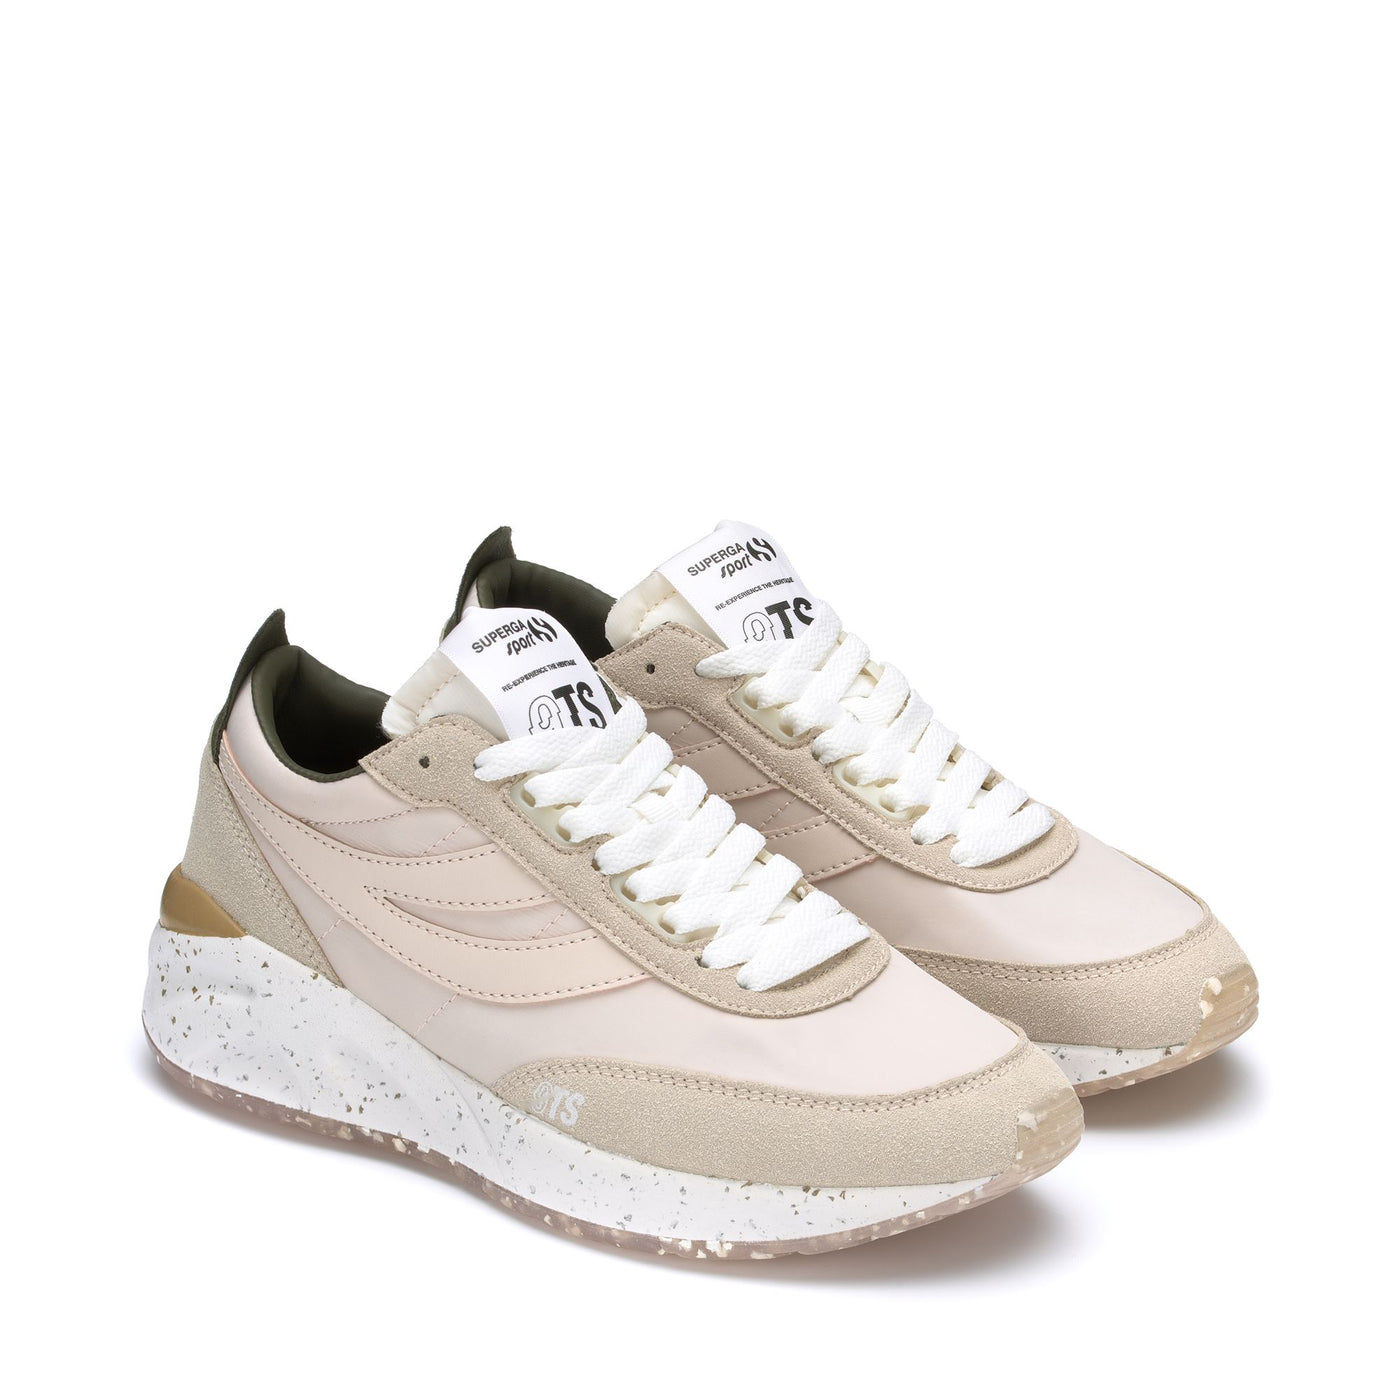 Sneakers Unisex 4089 TRAINING 9TS SLIM VEGAN FAUX LEATHER Low Cut PINK ALMOND-GREEN OLIVE-F AVORIO Dressed Front (jpg Rgb)	